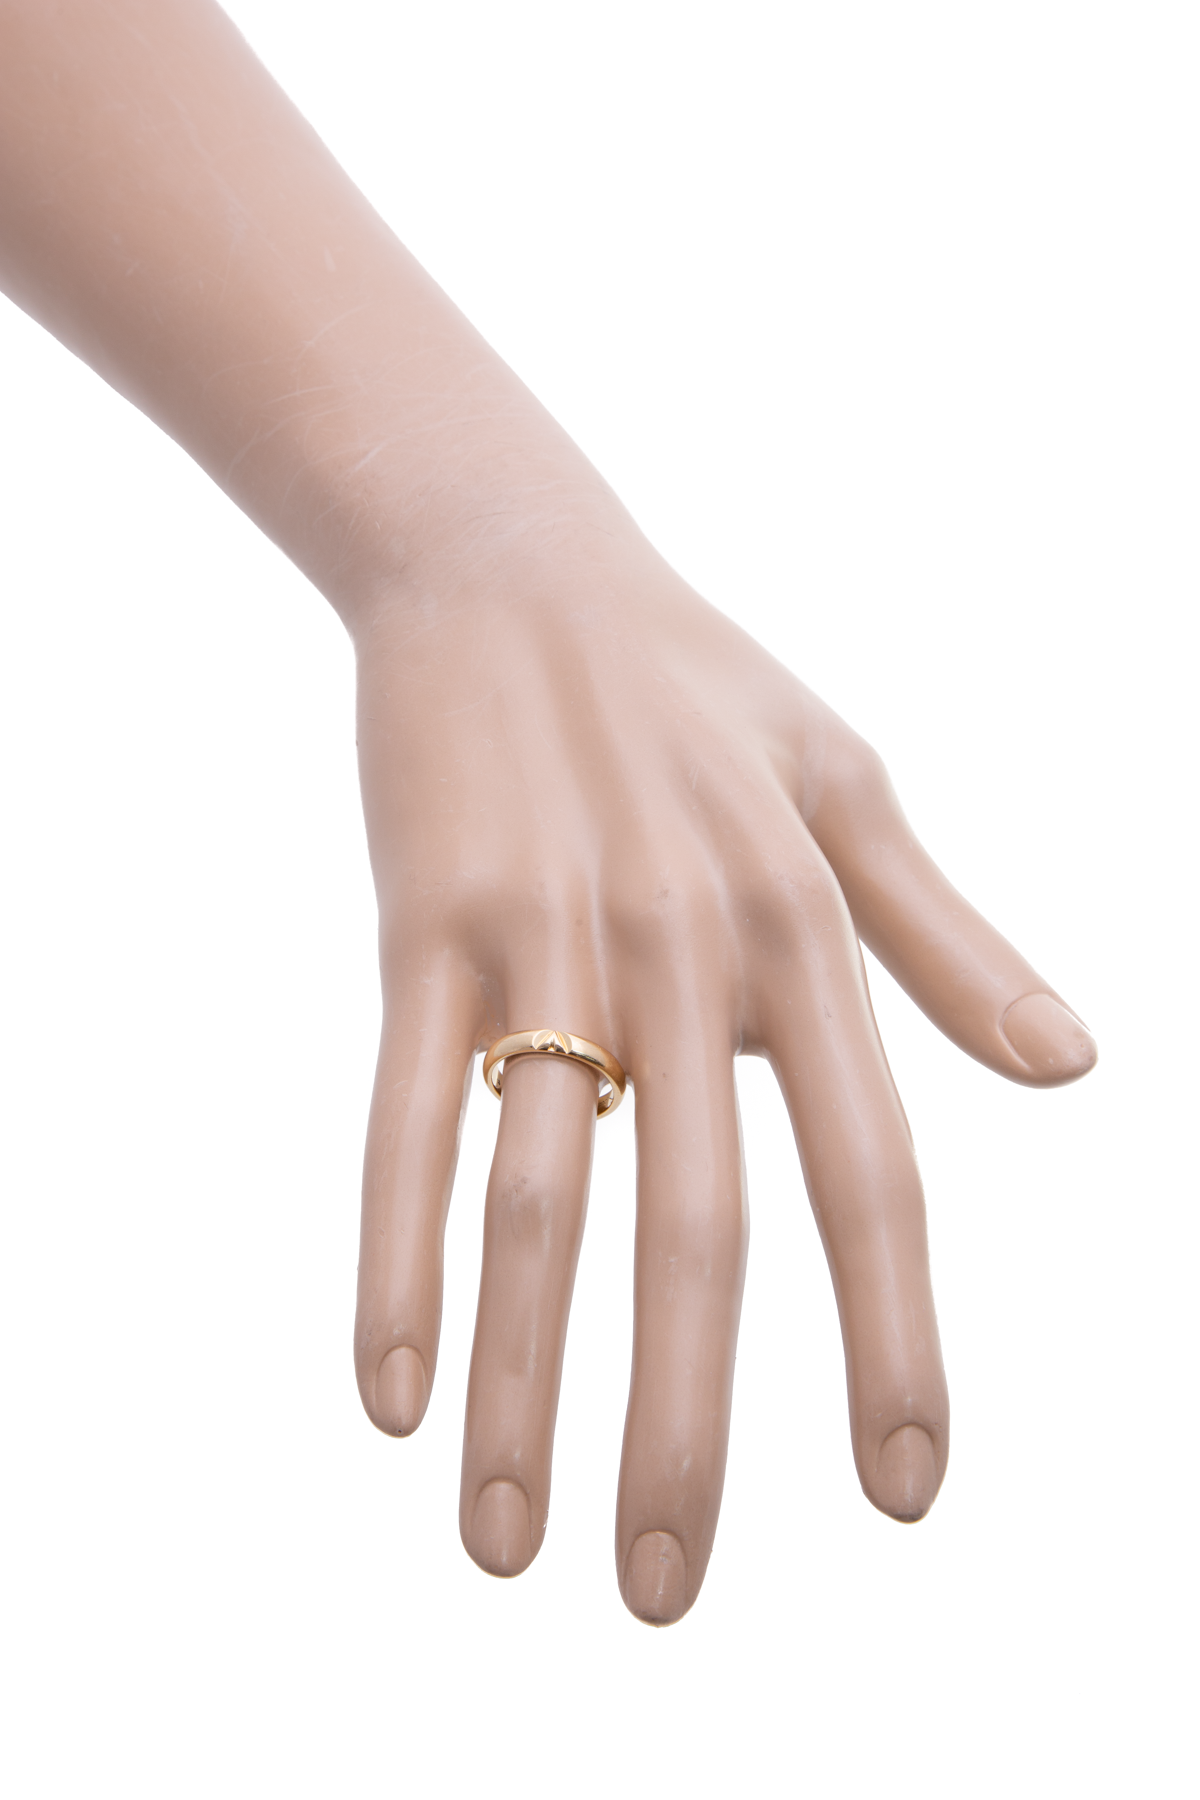 Shop Louis Vuitton Lv volt one band ring, pink gold and diamond